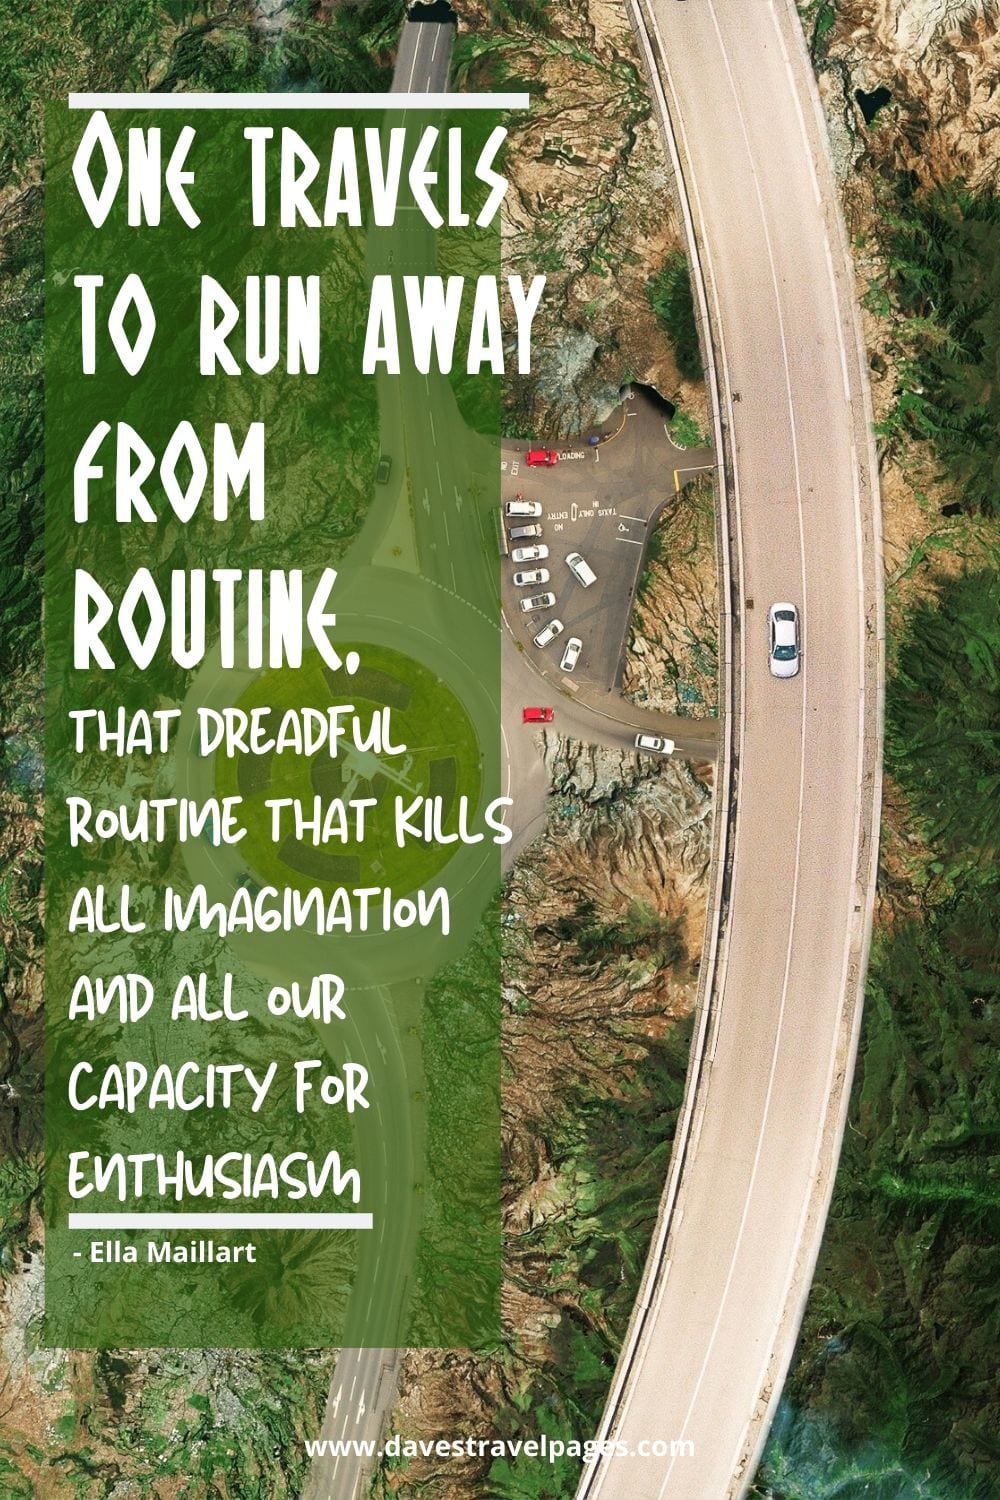 One travels to run away from routine, that dreadful routine that kills all imagination and all our capacity for enthusiasm. Ella Maillart